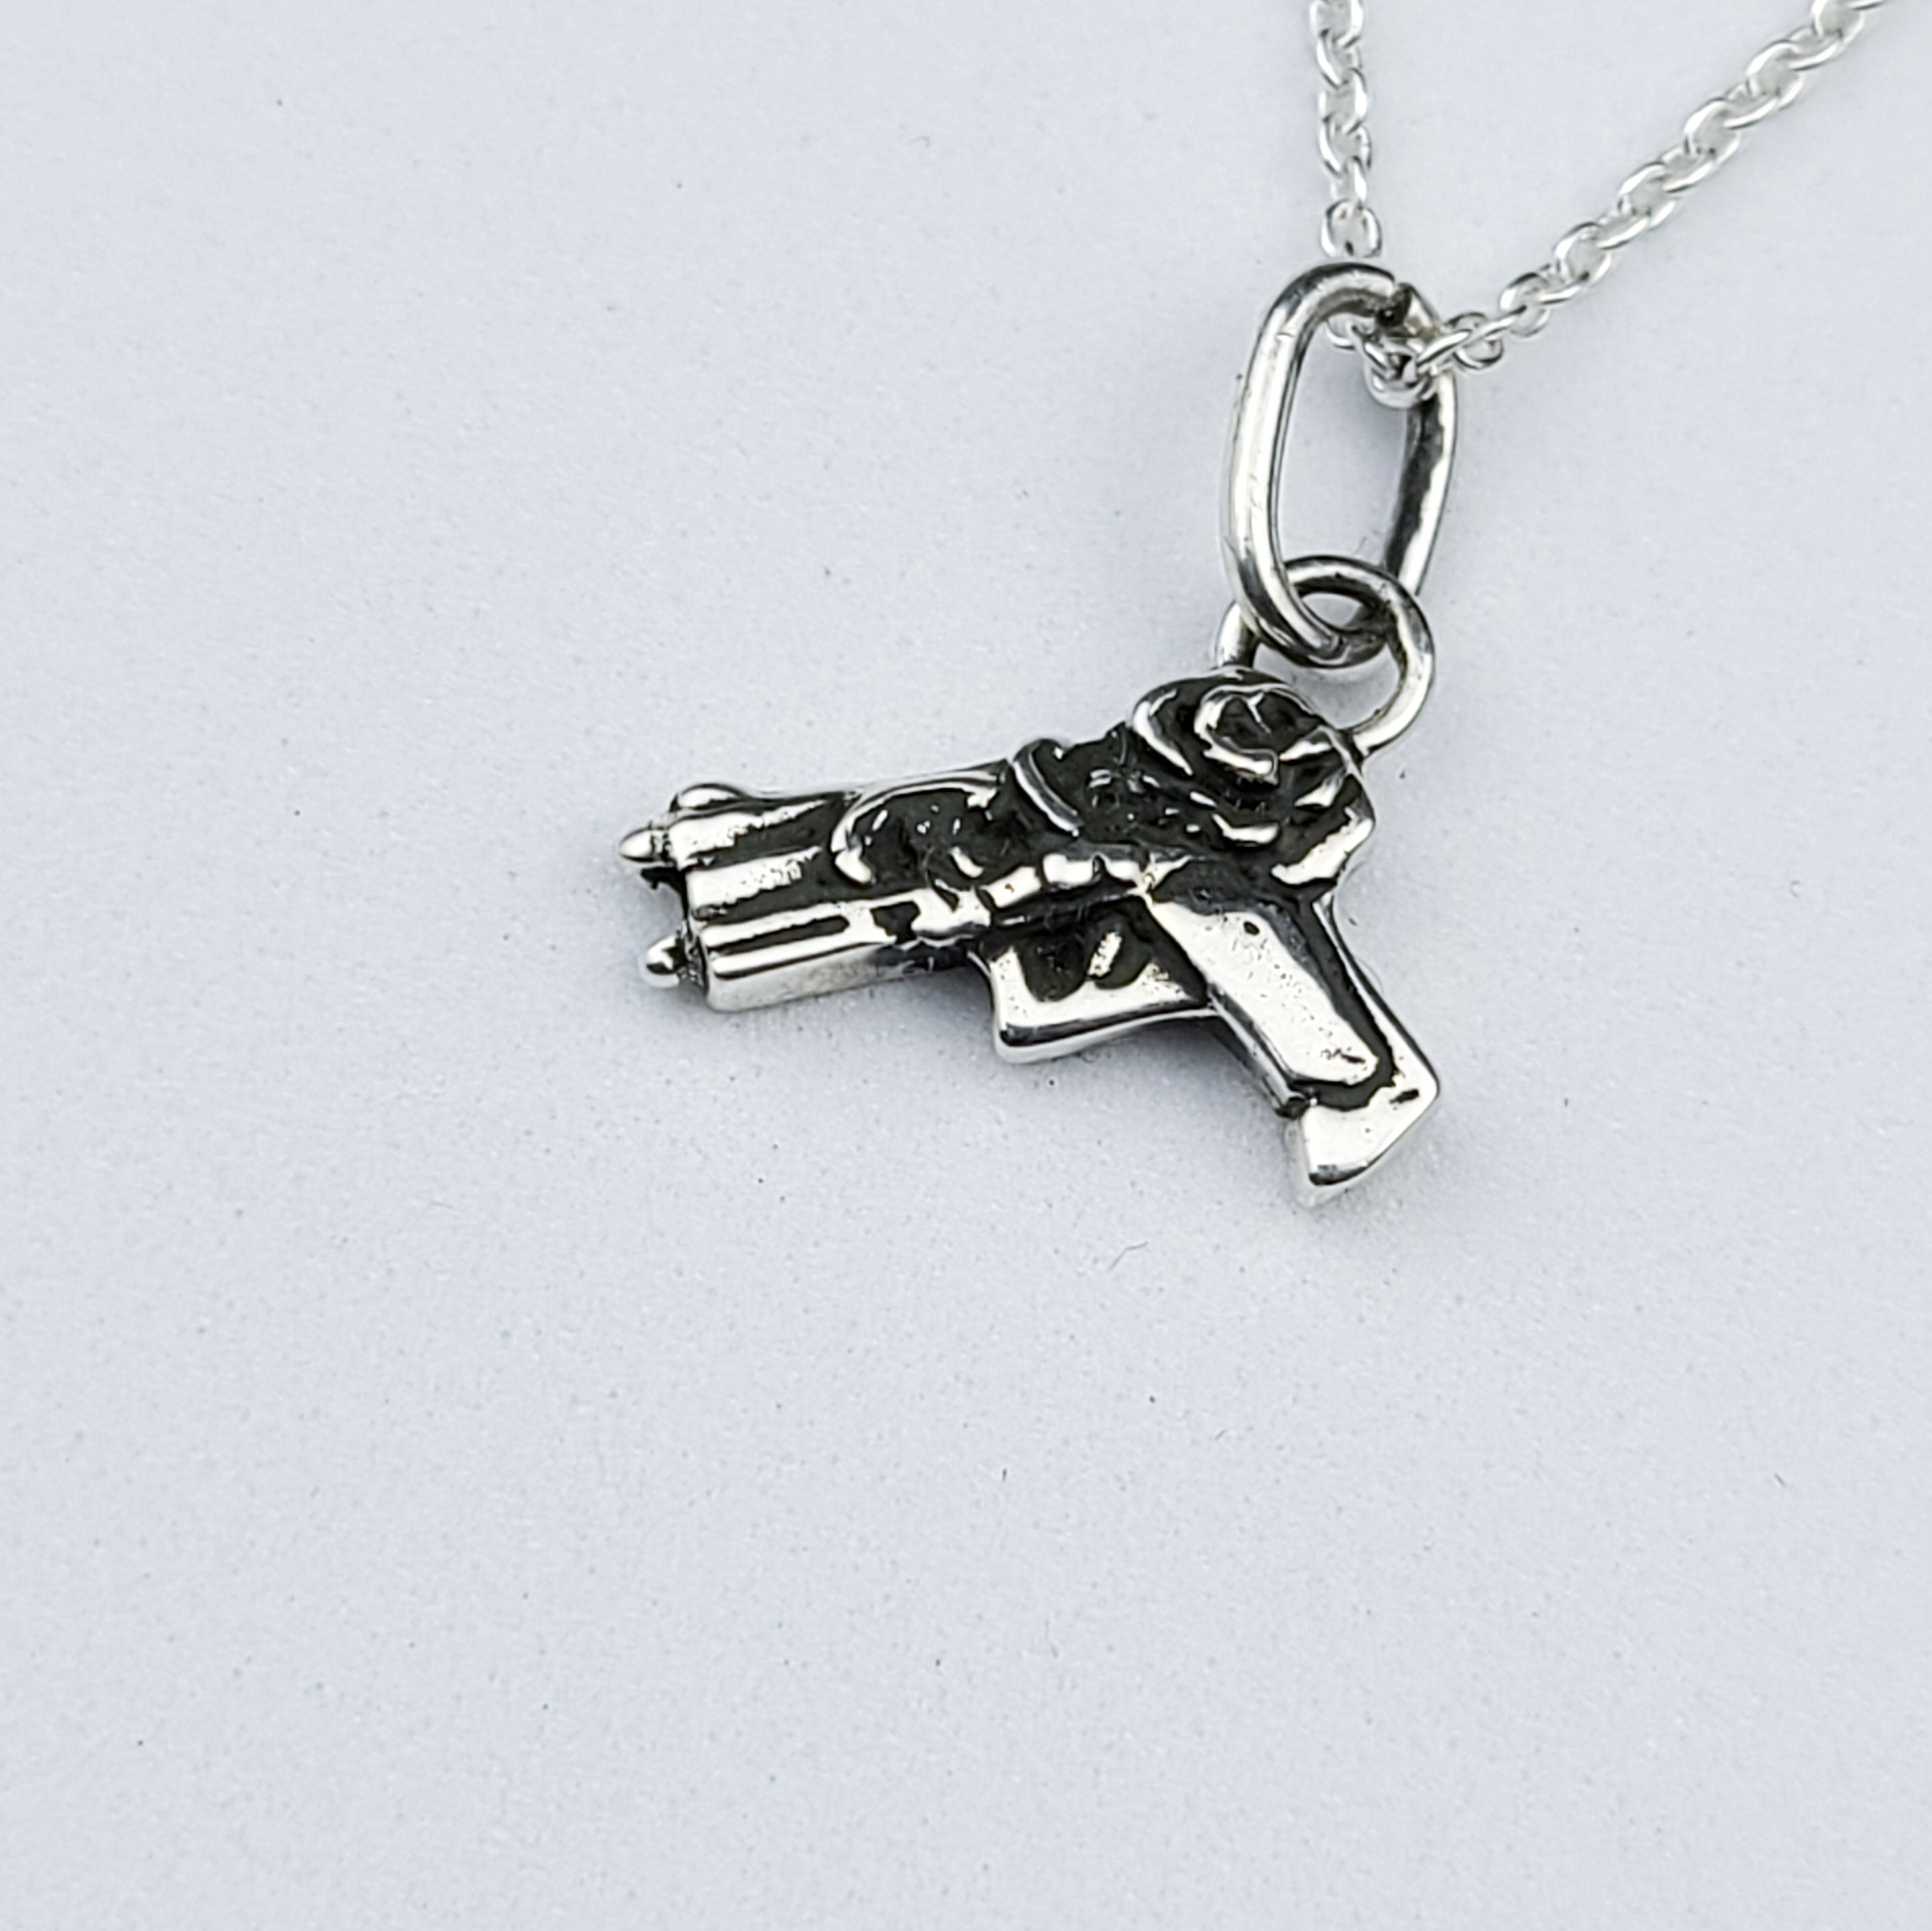 Tiny Silver Gun with Roses Pendant